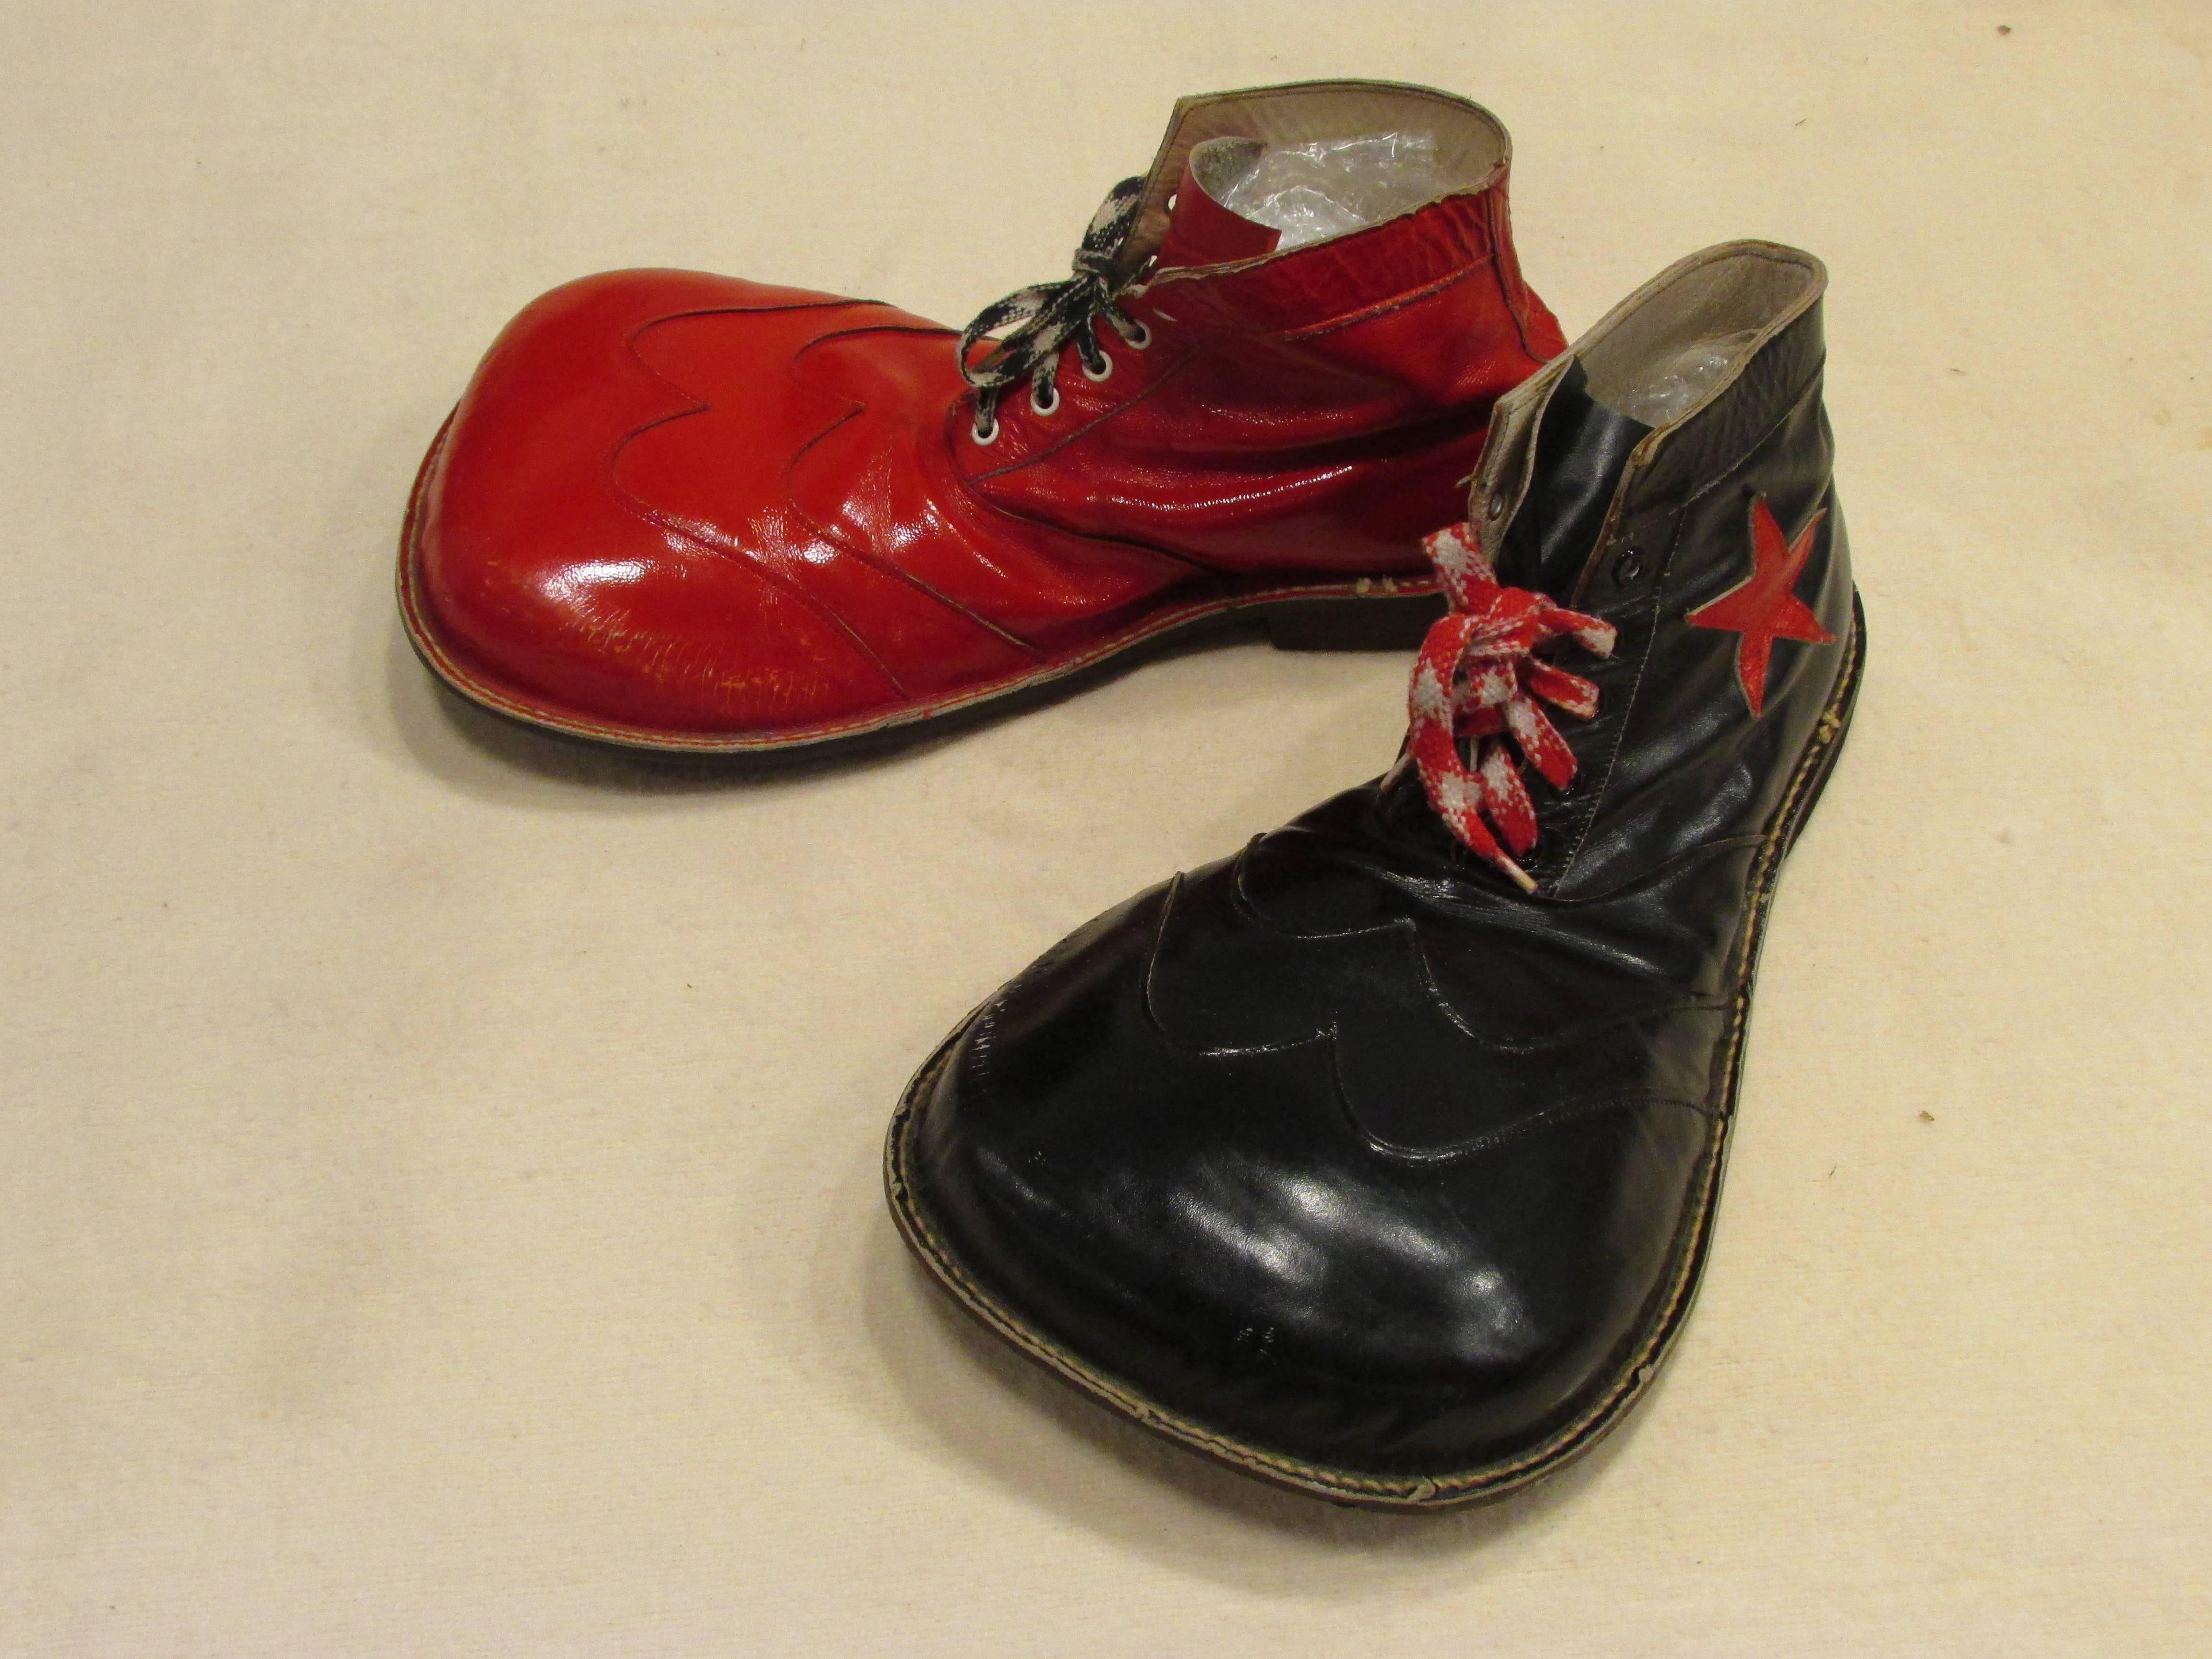 Pair of vintage red and black leather clown shoes each with applique star and man-made soles
From my collection of vintage Clown Shoes